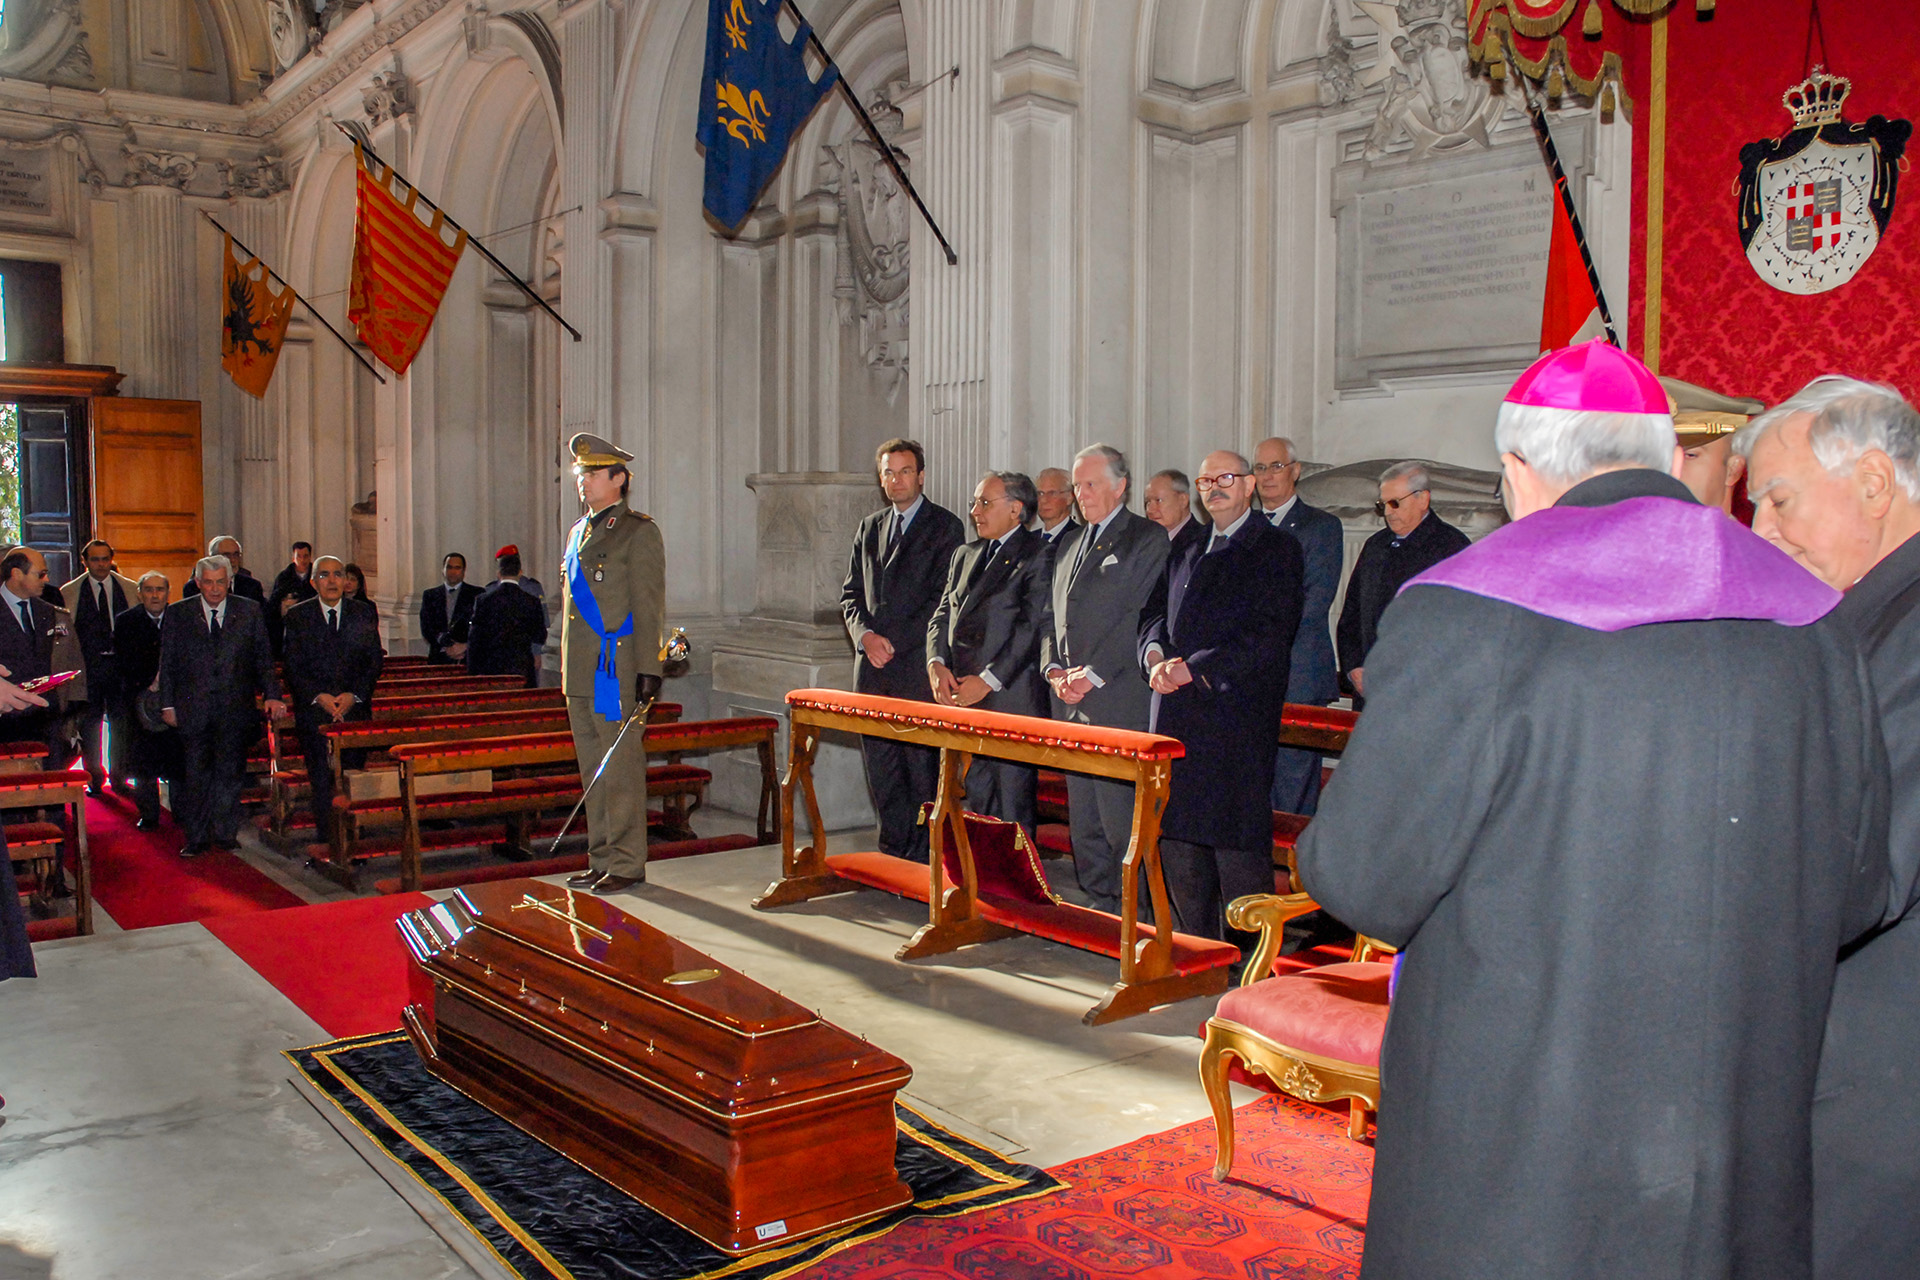 Grand Master lying in state